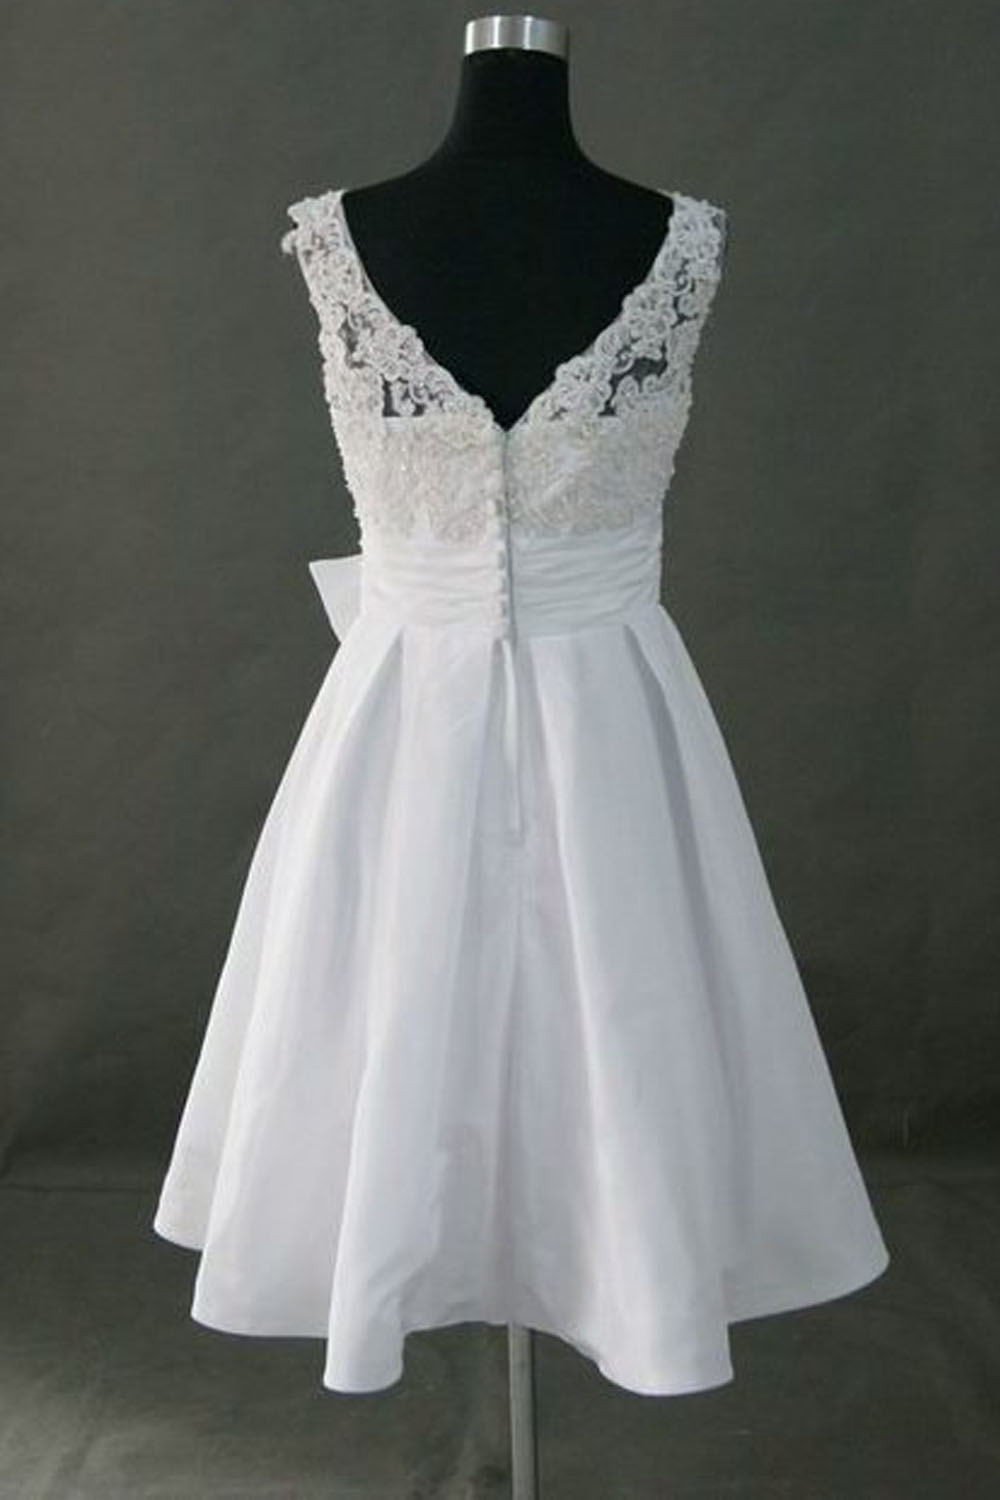 Pretty Simple Short Lace Wedding Dresses With Bow Belt W5 on Luulla